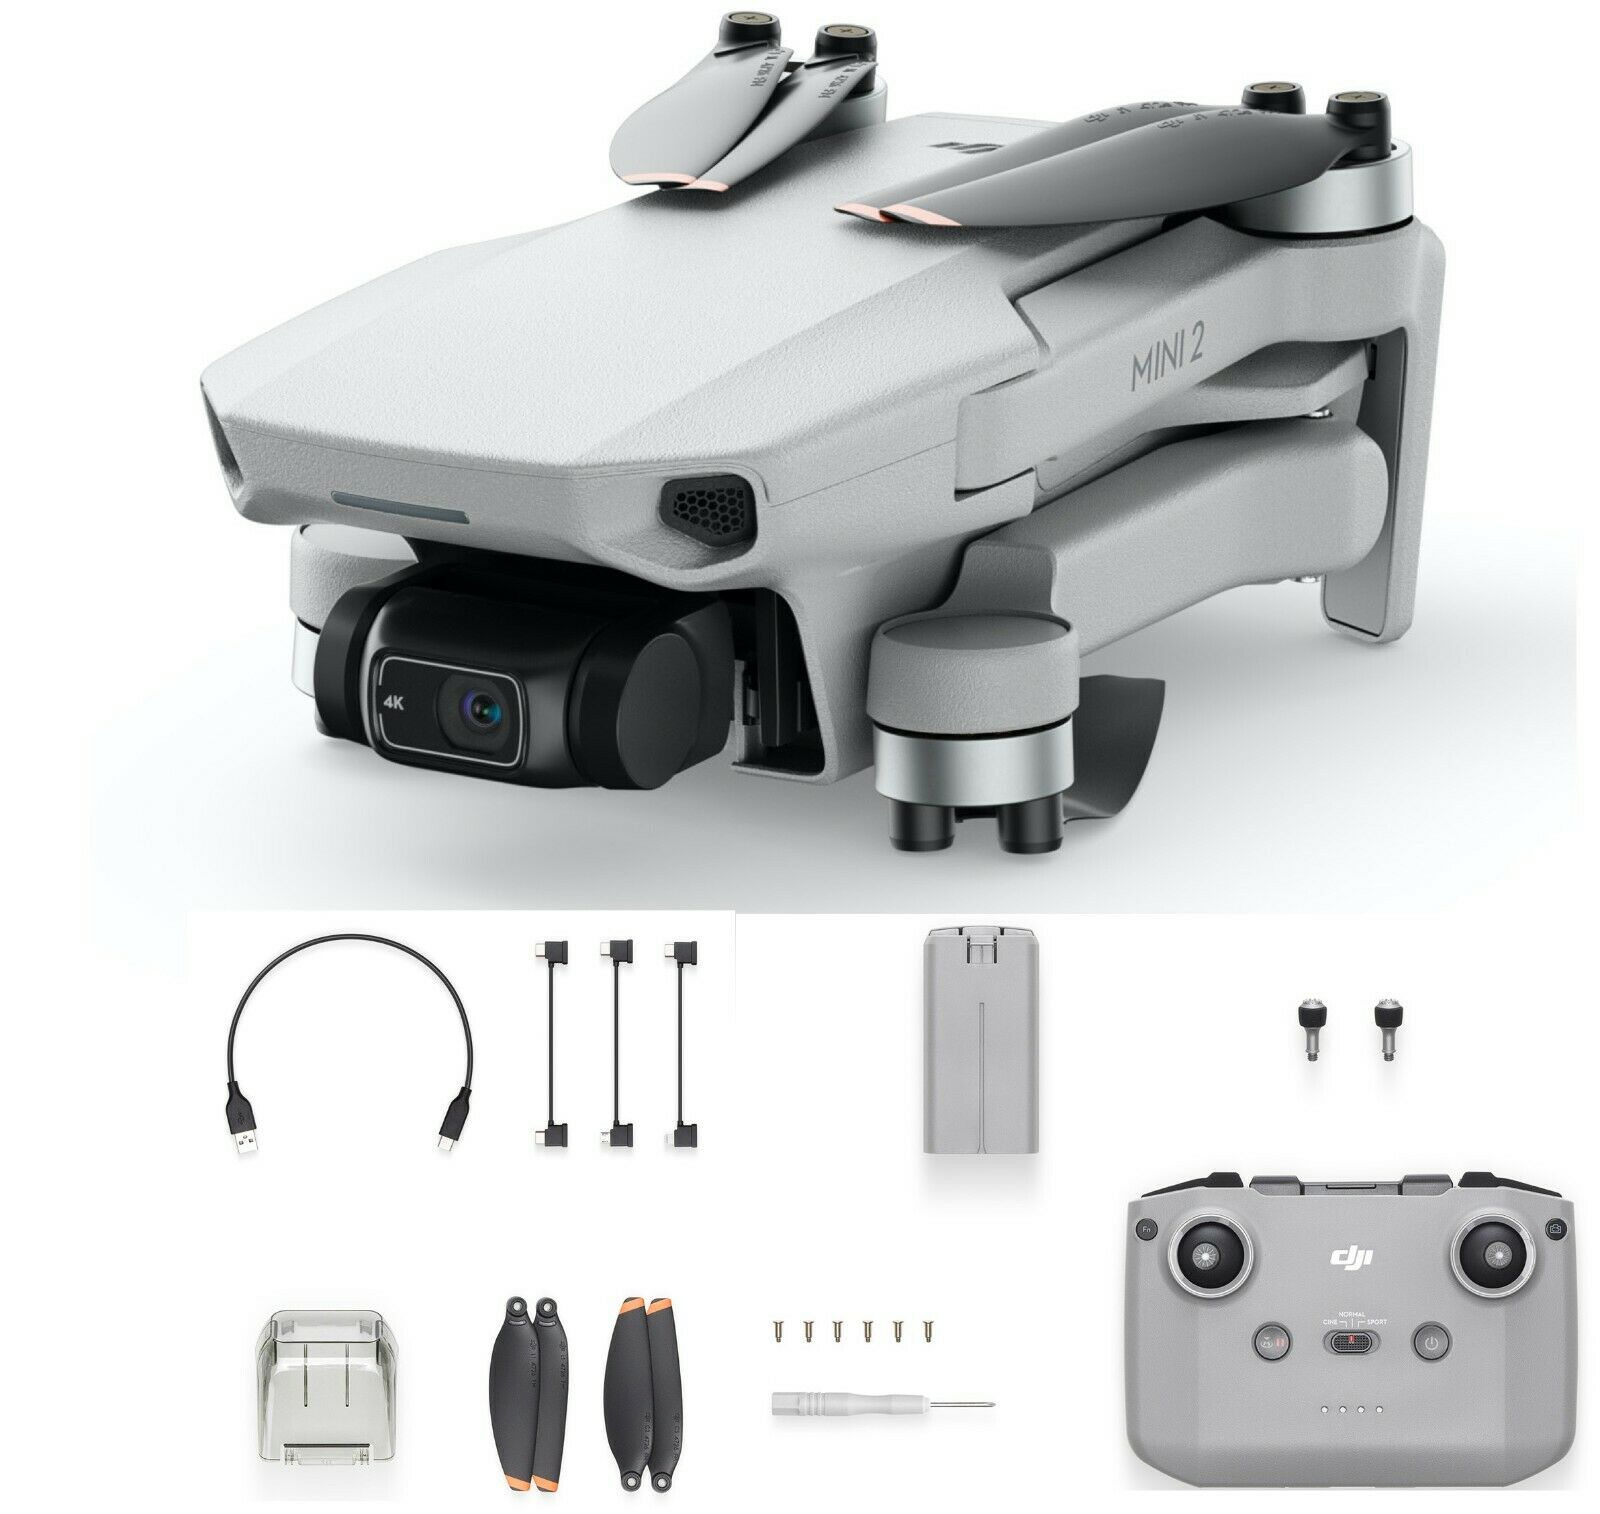 DJI Mini 2 Drone Quadcopter Ready To Fly -Certified Refurbished